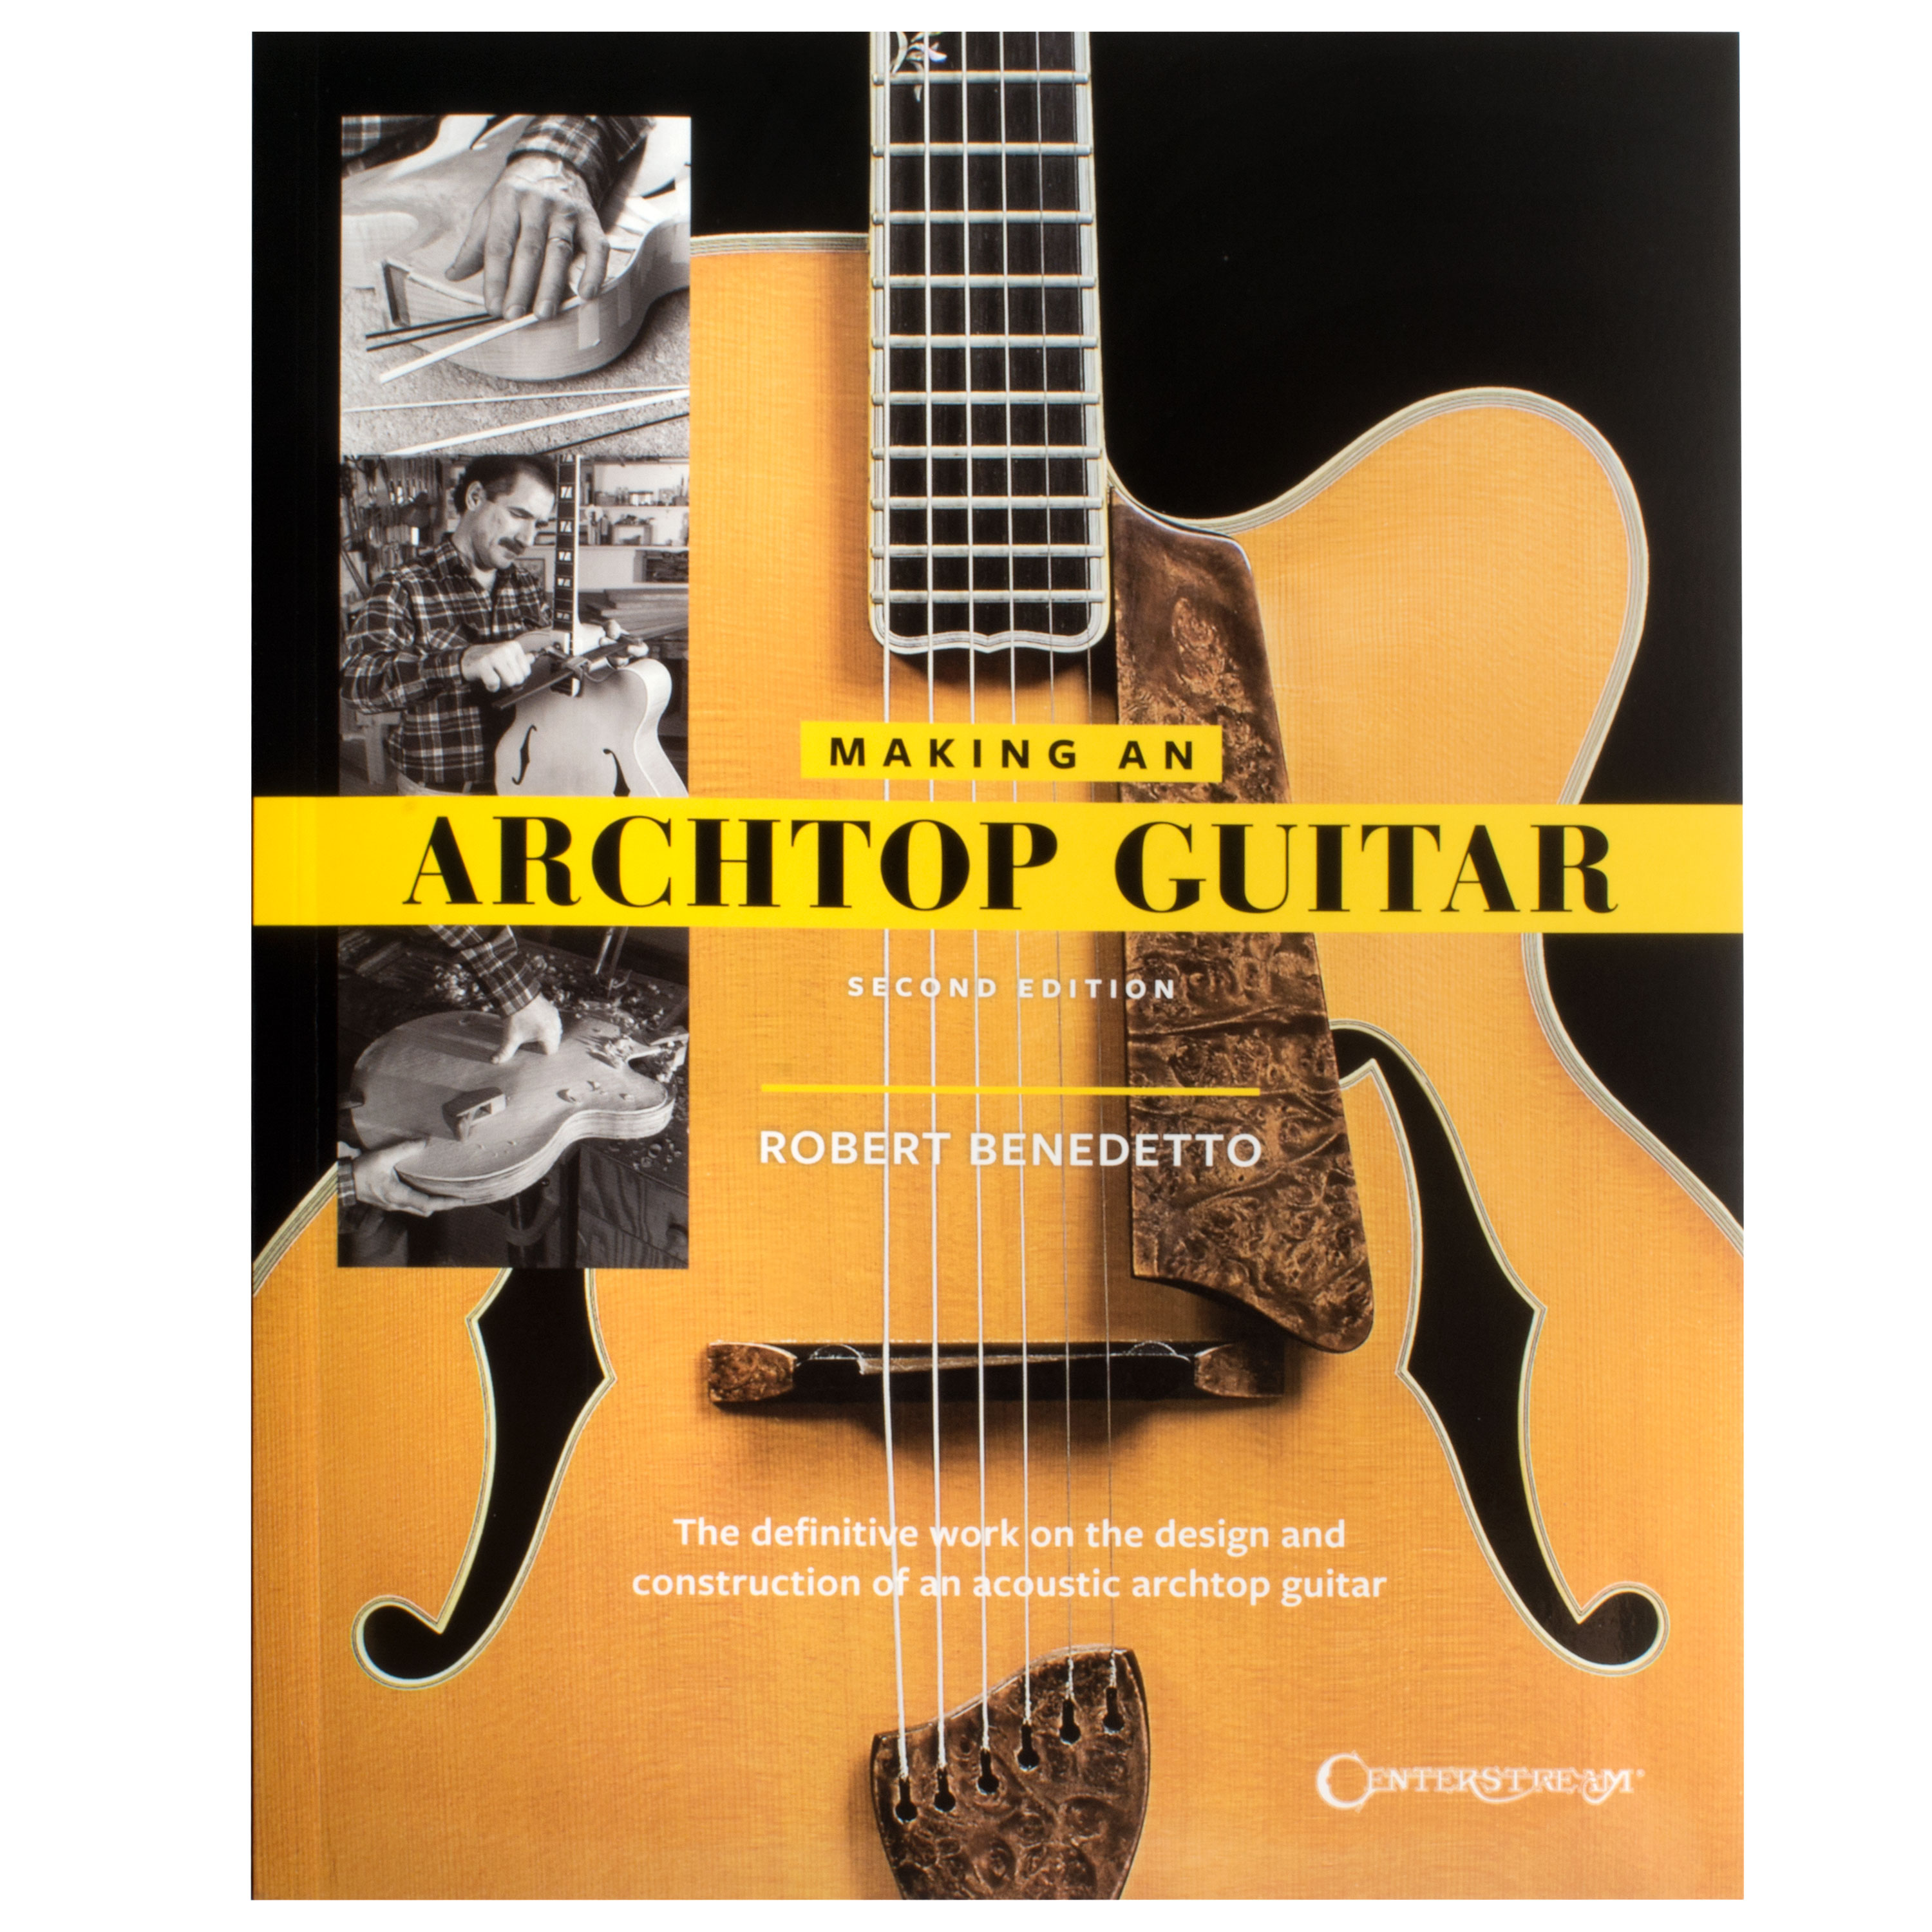 Archtop Guitar Design and Construction